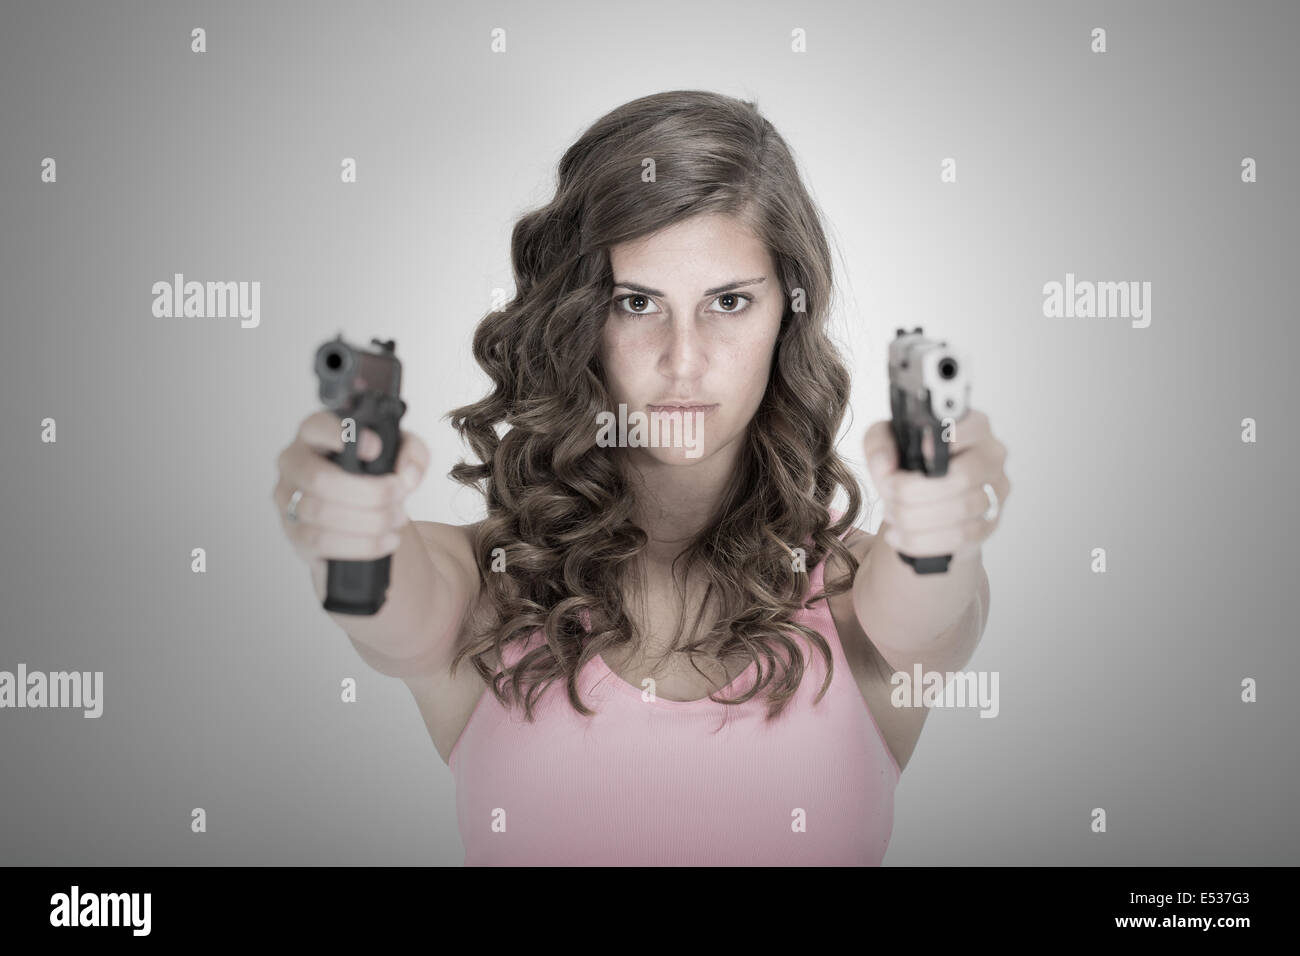 Young girl pointing two guns directly at you Stock Photo